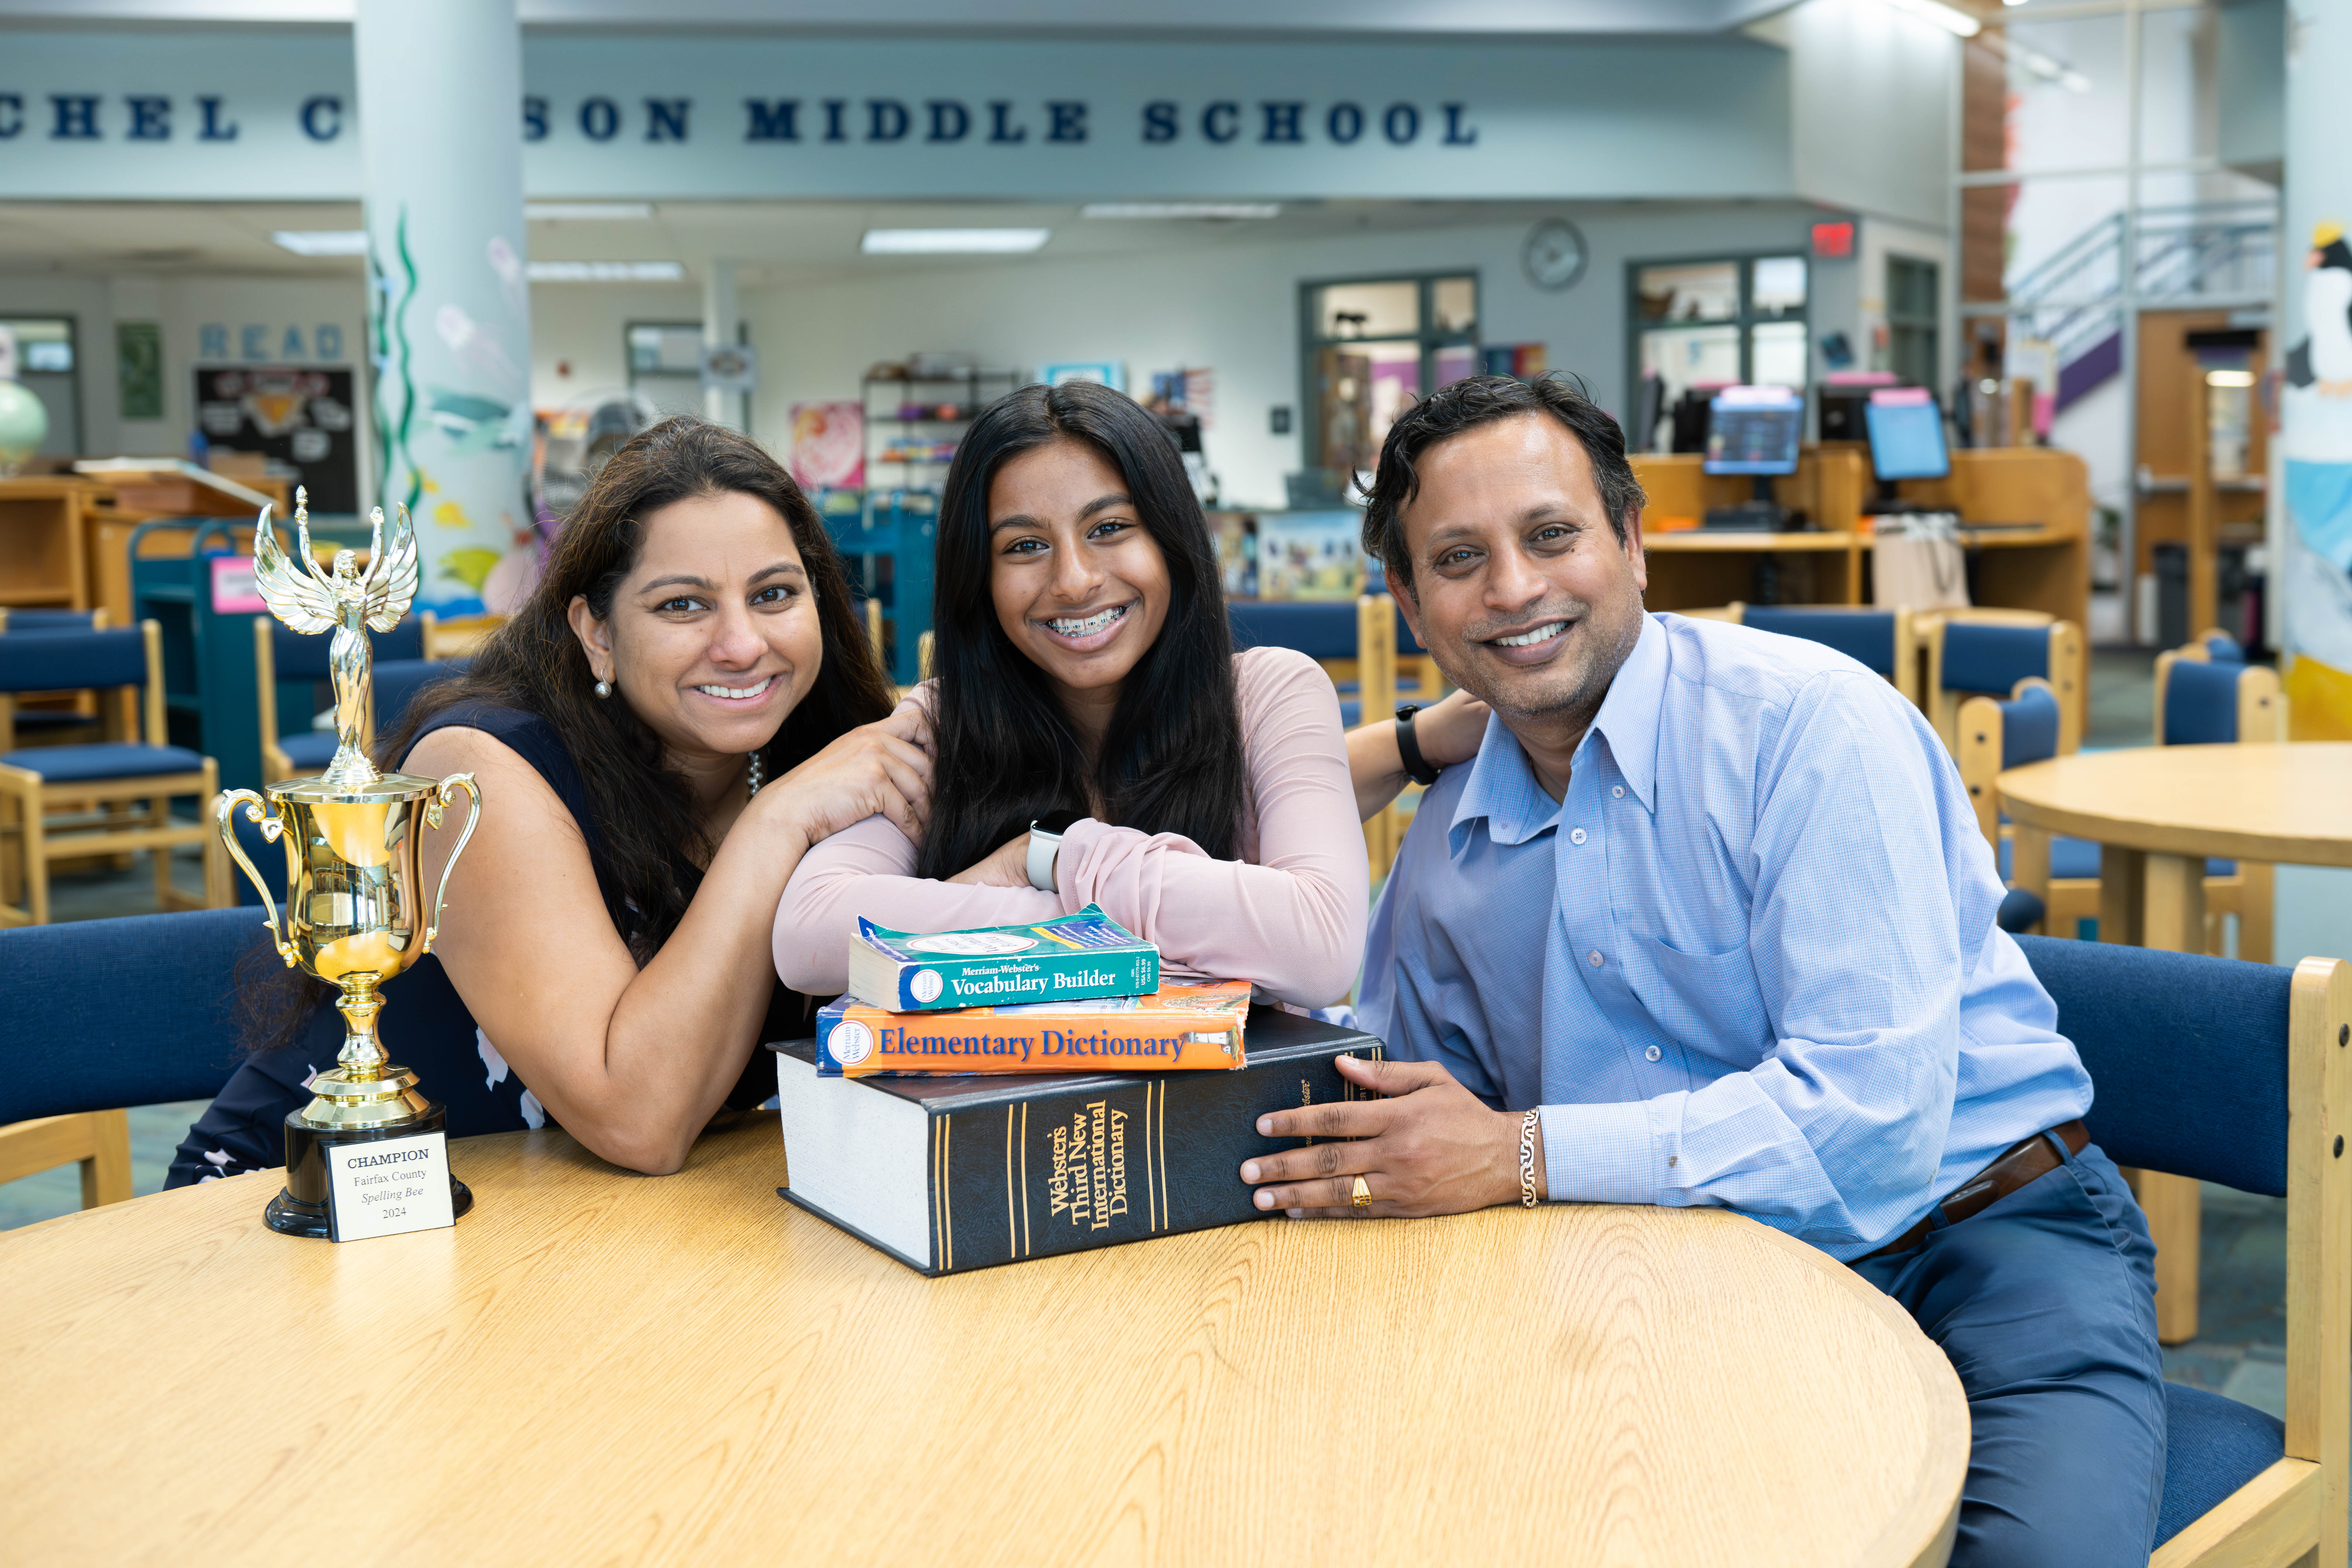 Ankita Balaji poses with her parents, mother on the left, father on the right. The three of them are seated at a table in the Rachel Carson Middle School library. Stacks of dictionaries and Ankita's trophy are on the table in front of them.